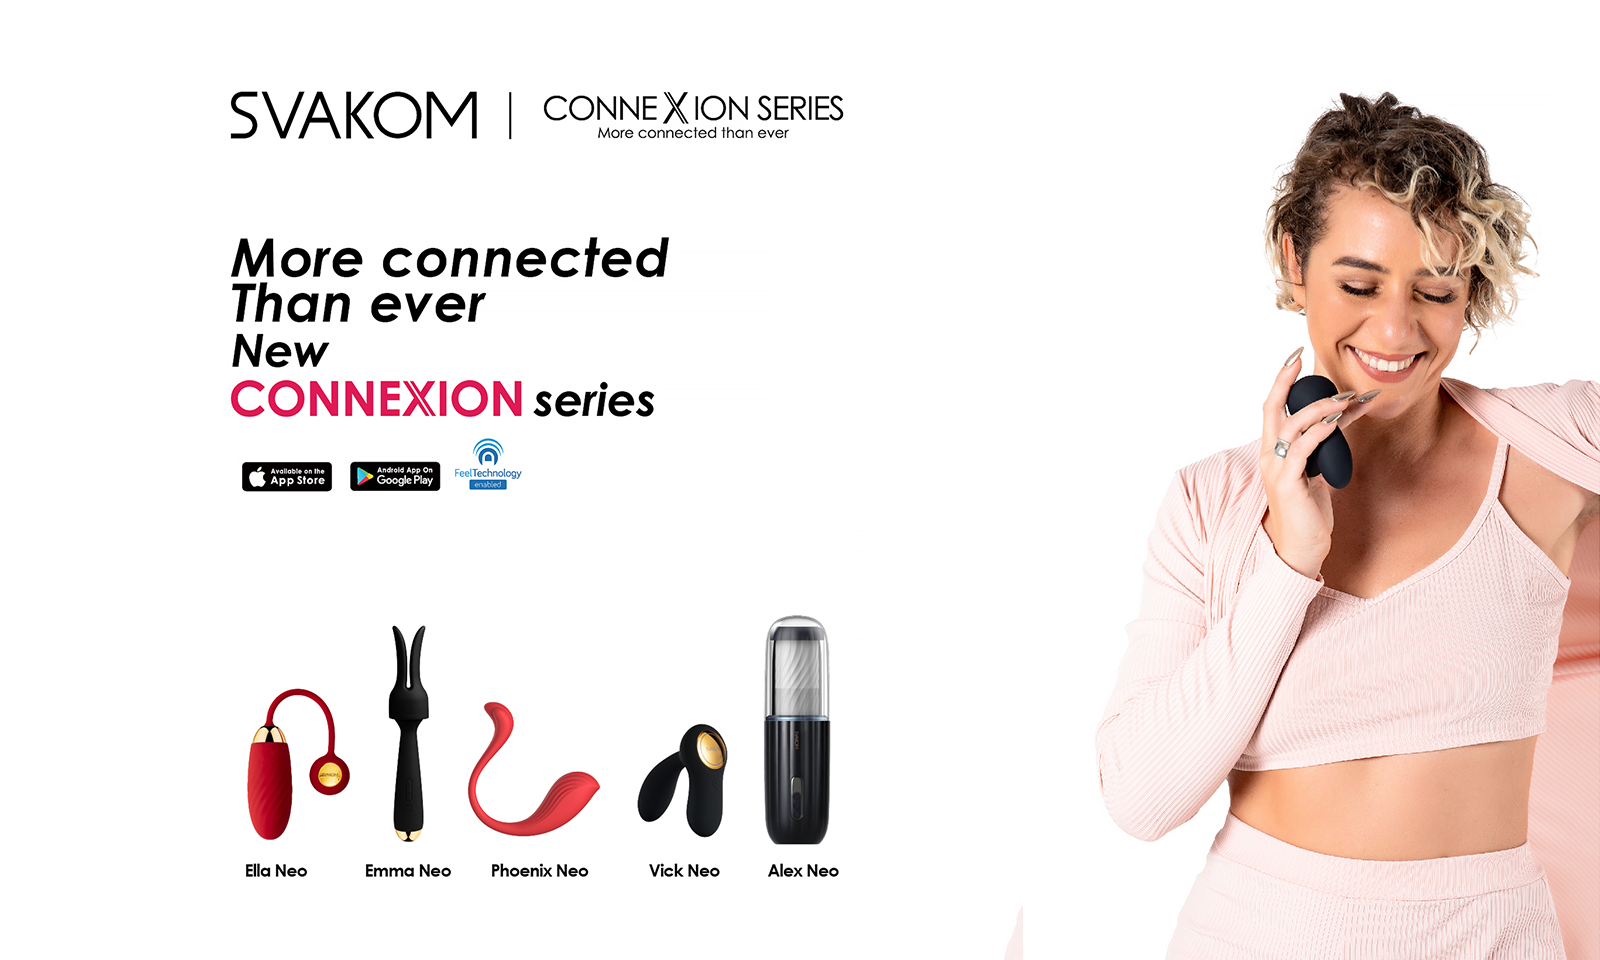 Svakom's Connexion Series Now Allows More Connection Than Ever